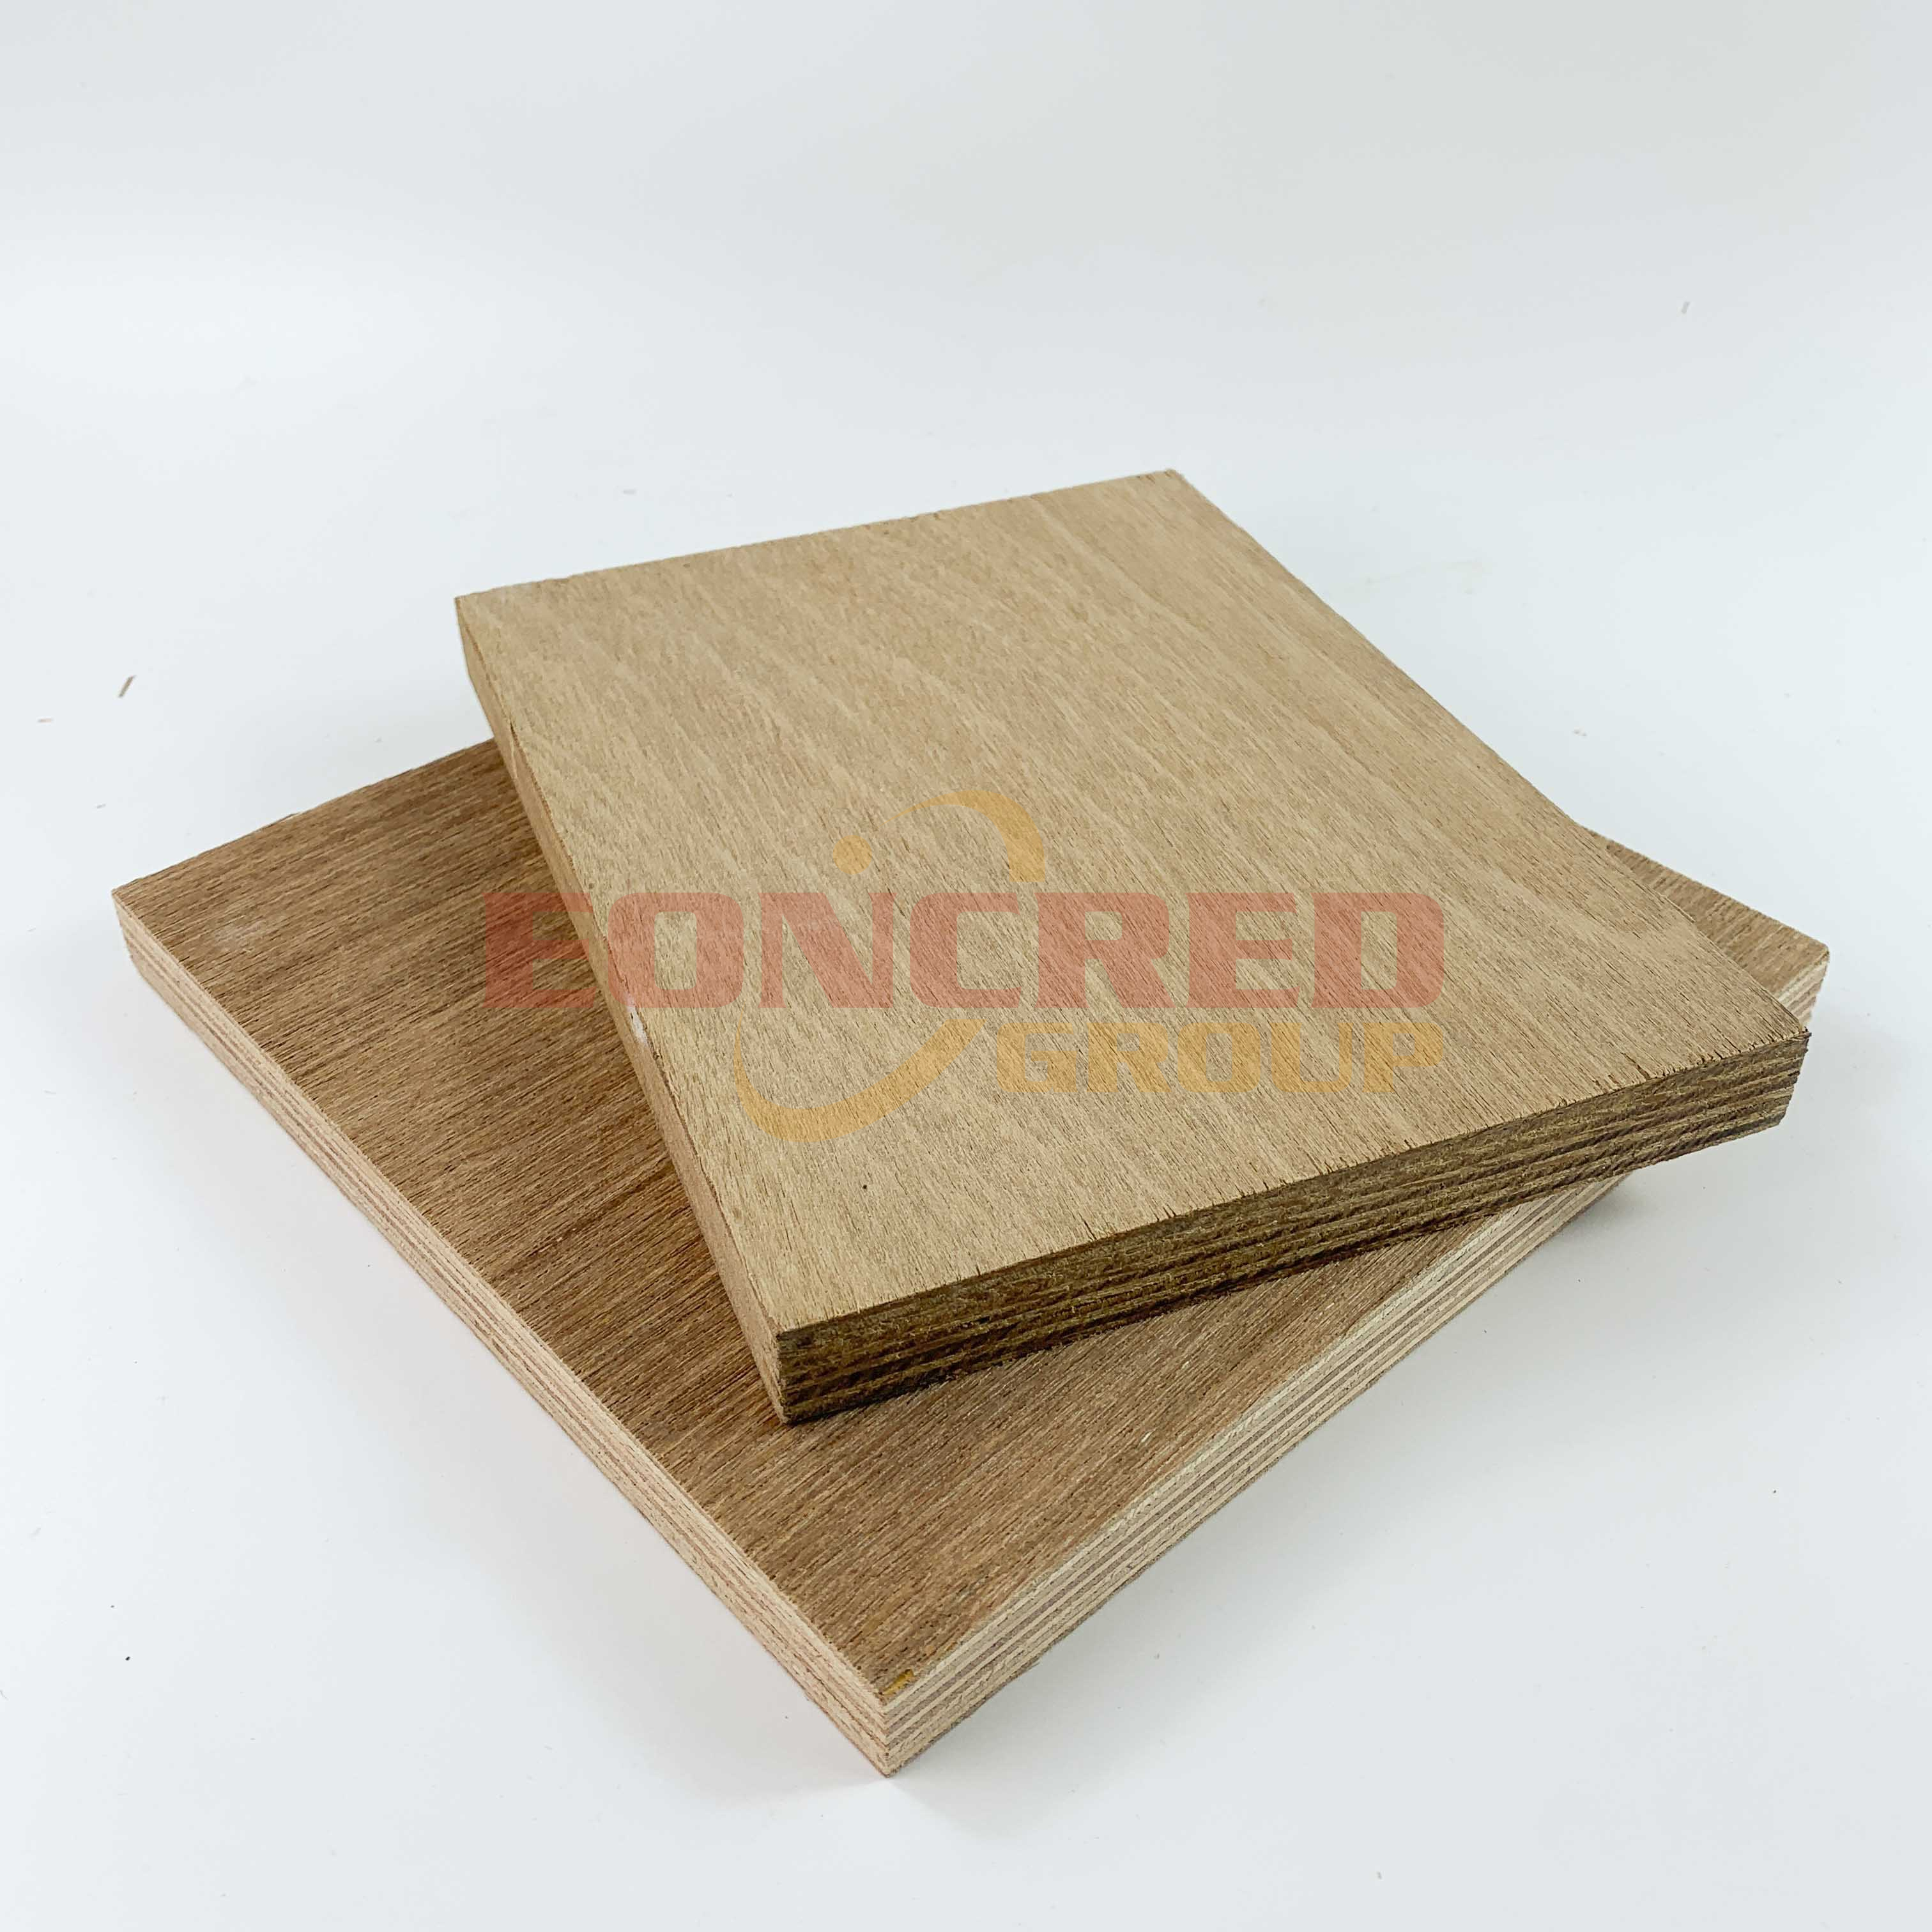 The lower price of plywood